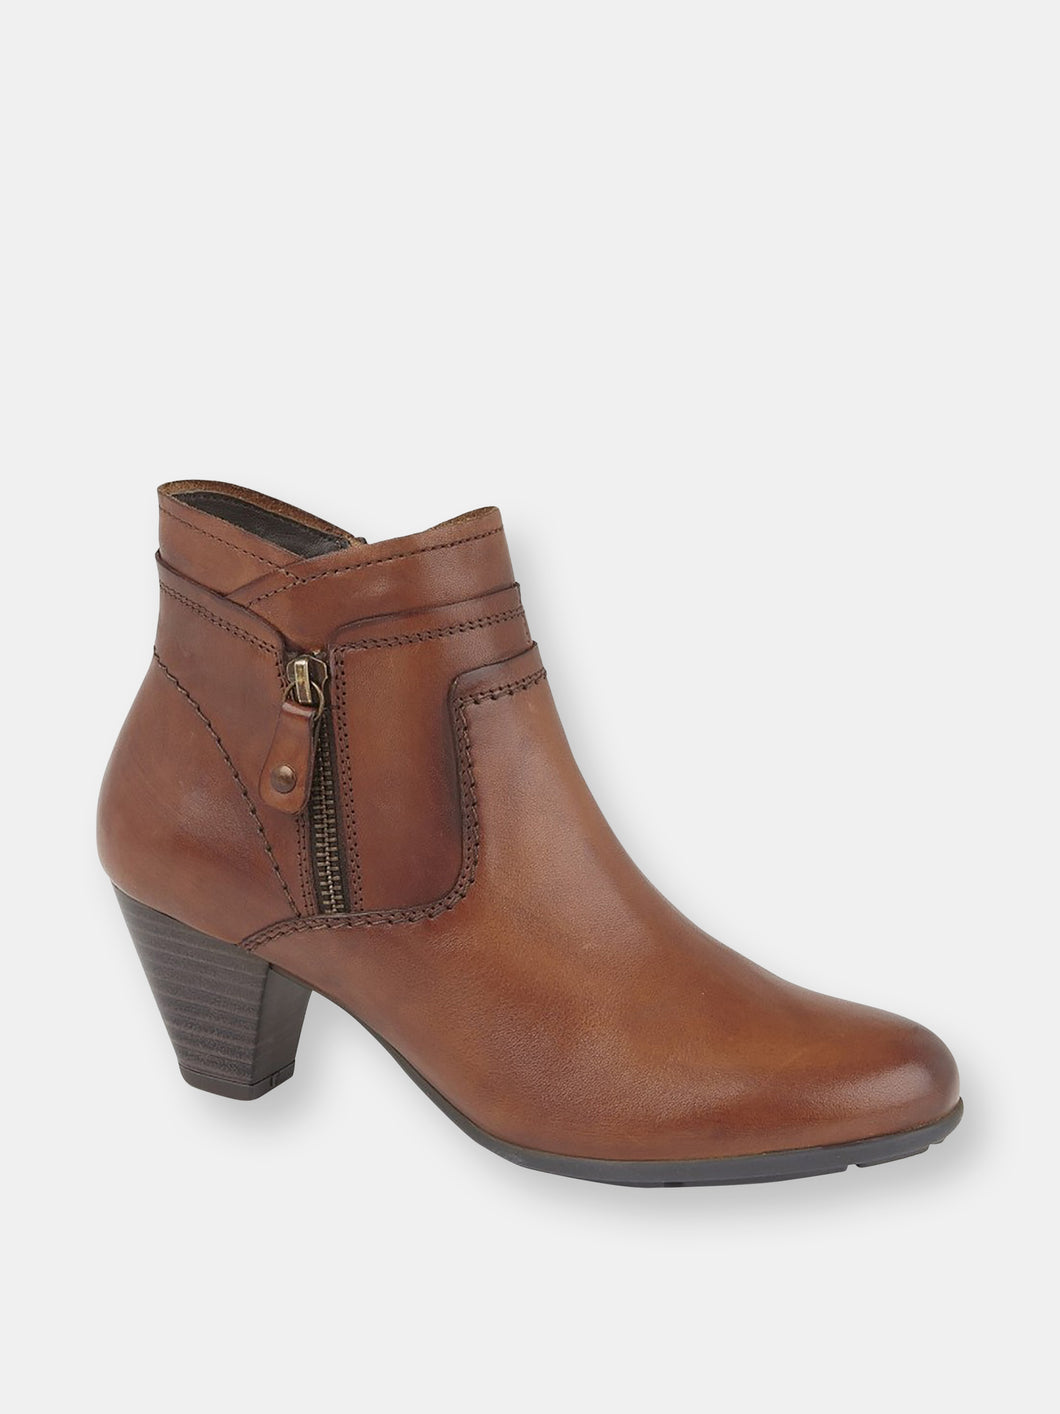 Womens/Ladies Cleo Leather Ankle Boots - Tan